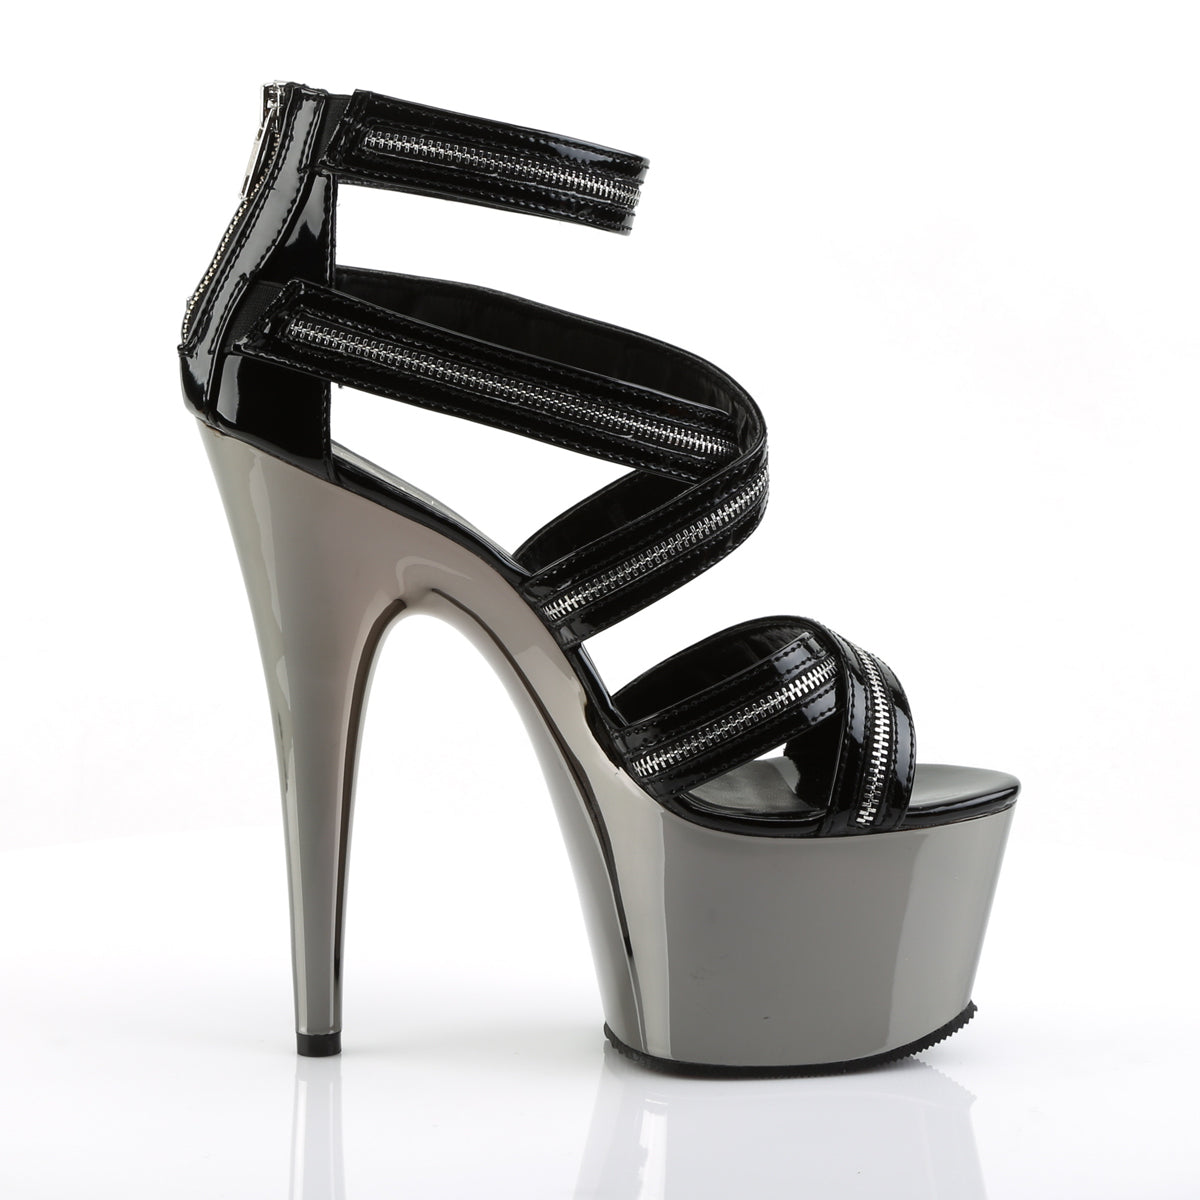 Pleaser Womens Sandals ADORE-767 Blk/Pewter Chrome